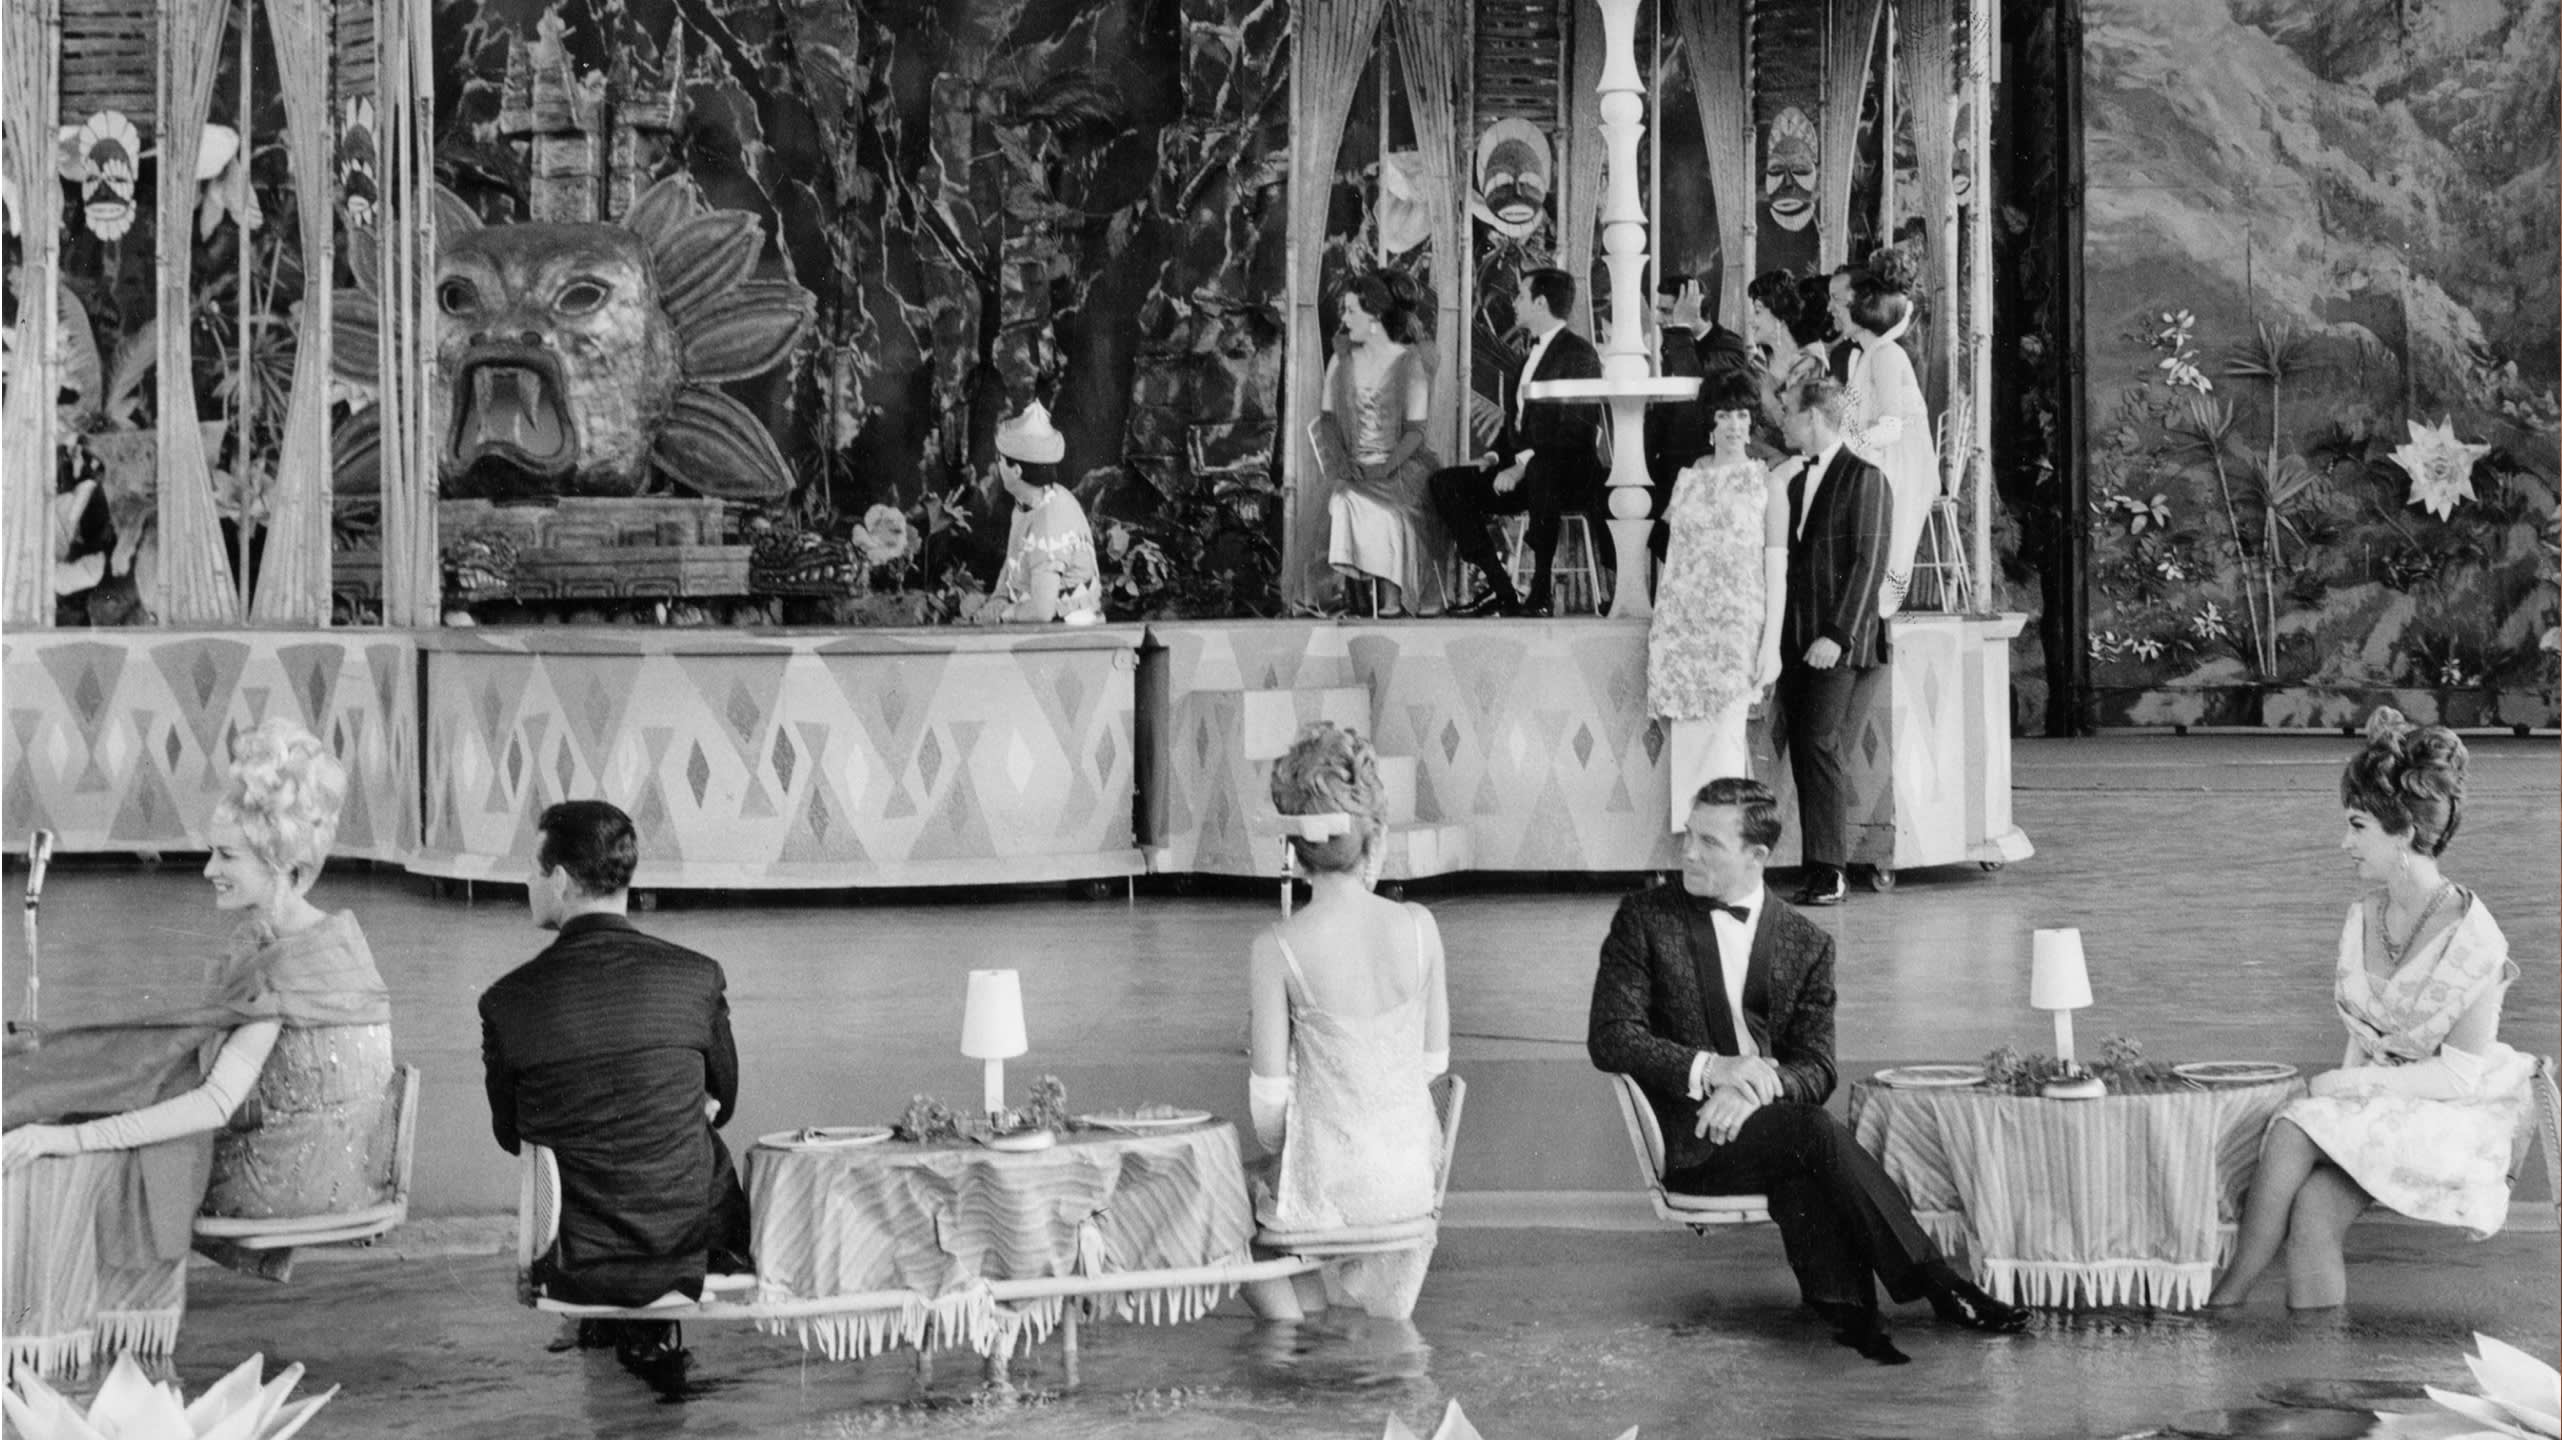 Brioni designs shown at the Waldorf-Astoria during the World’s Fair in New York City, 1964